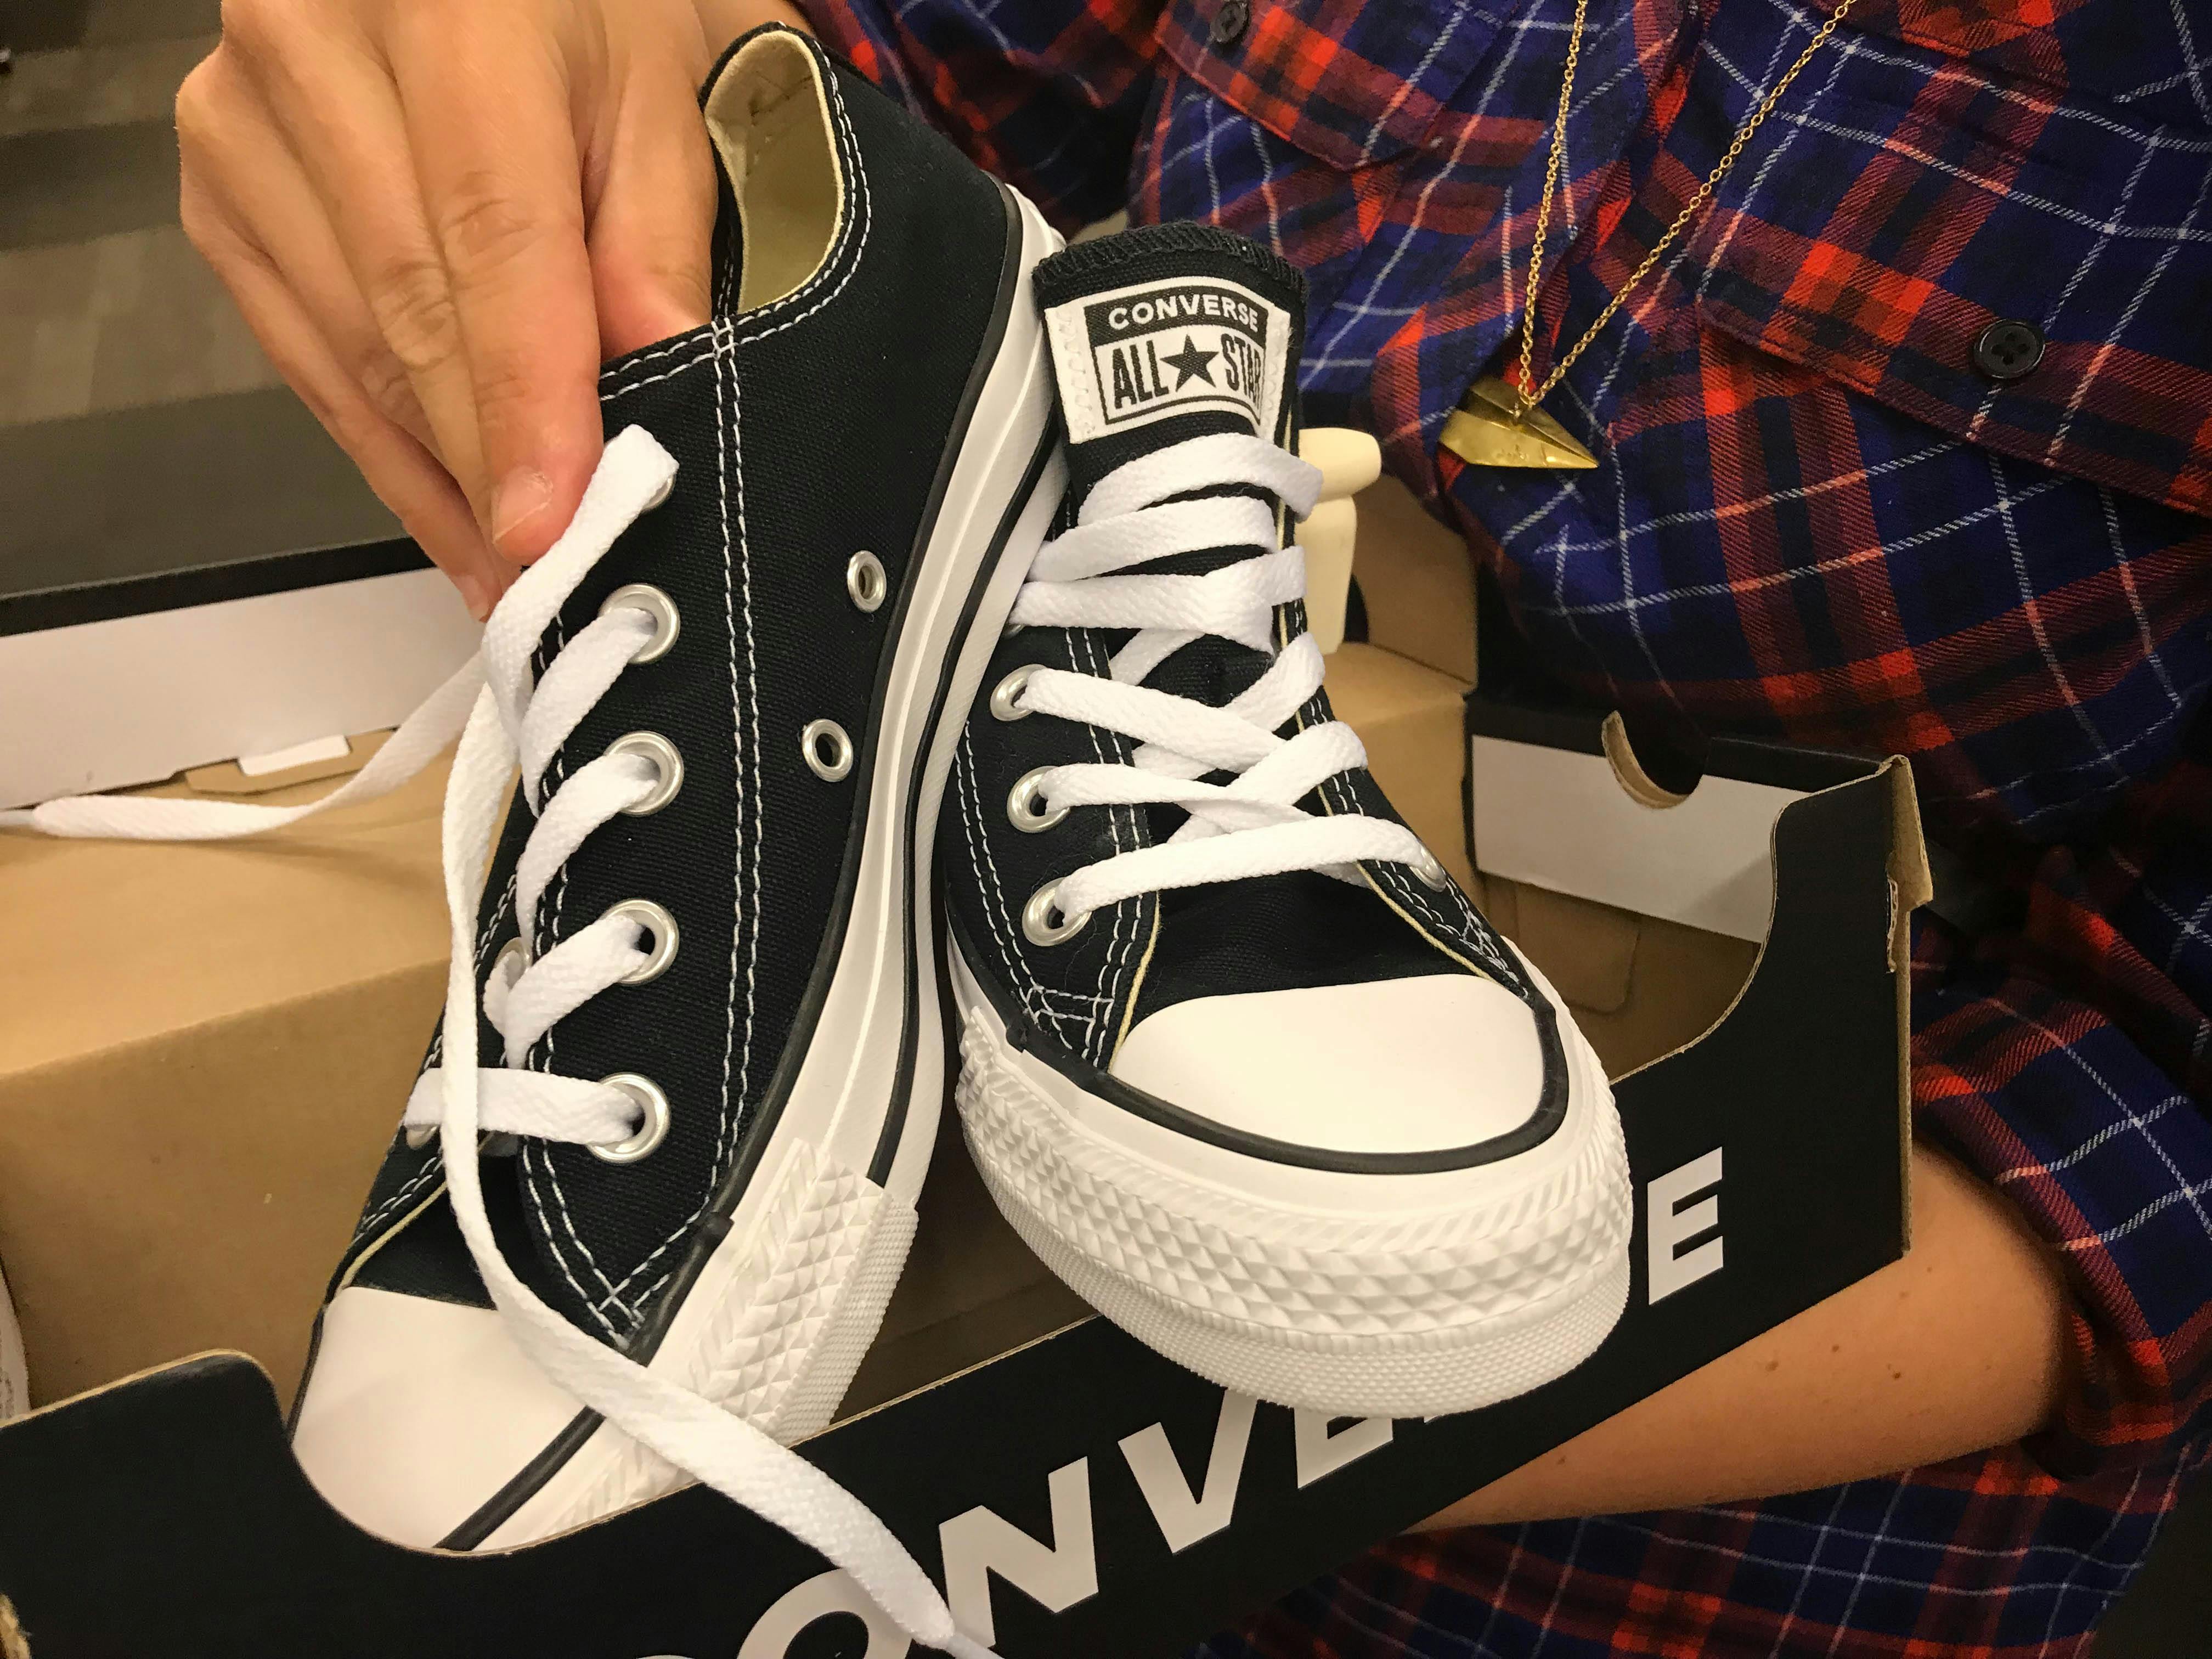 15 Converse Sales Tips and Tricks To 